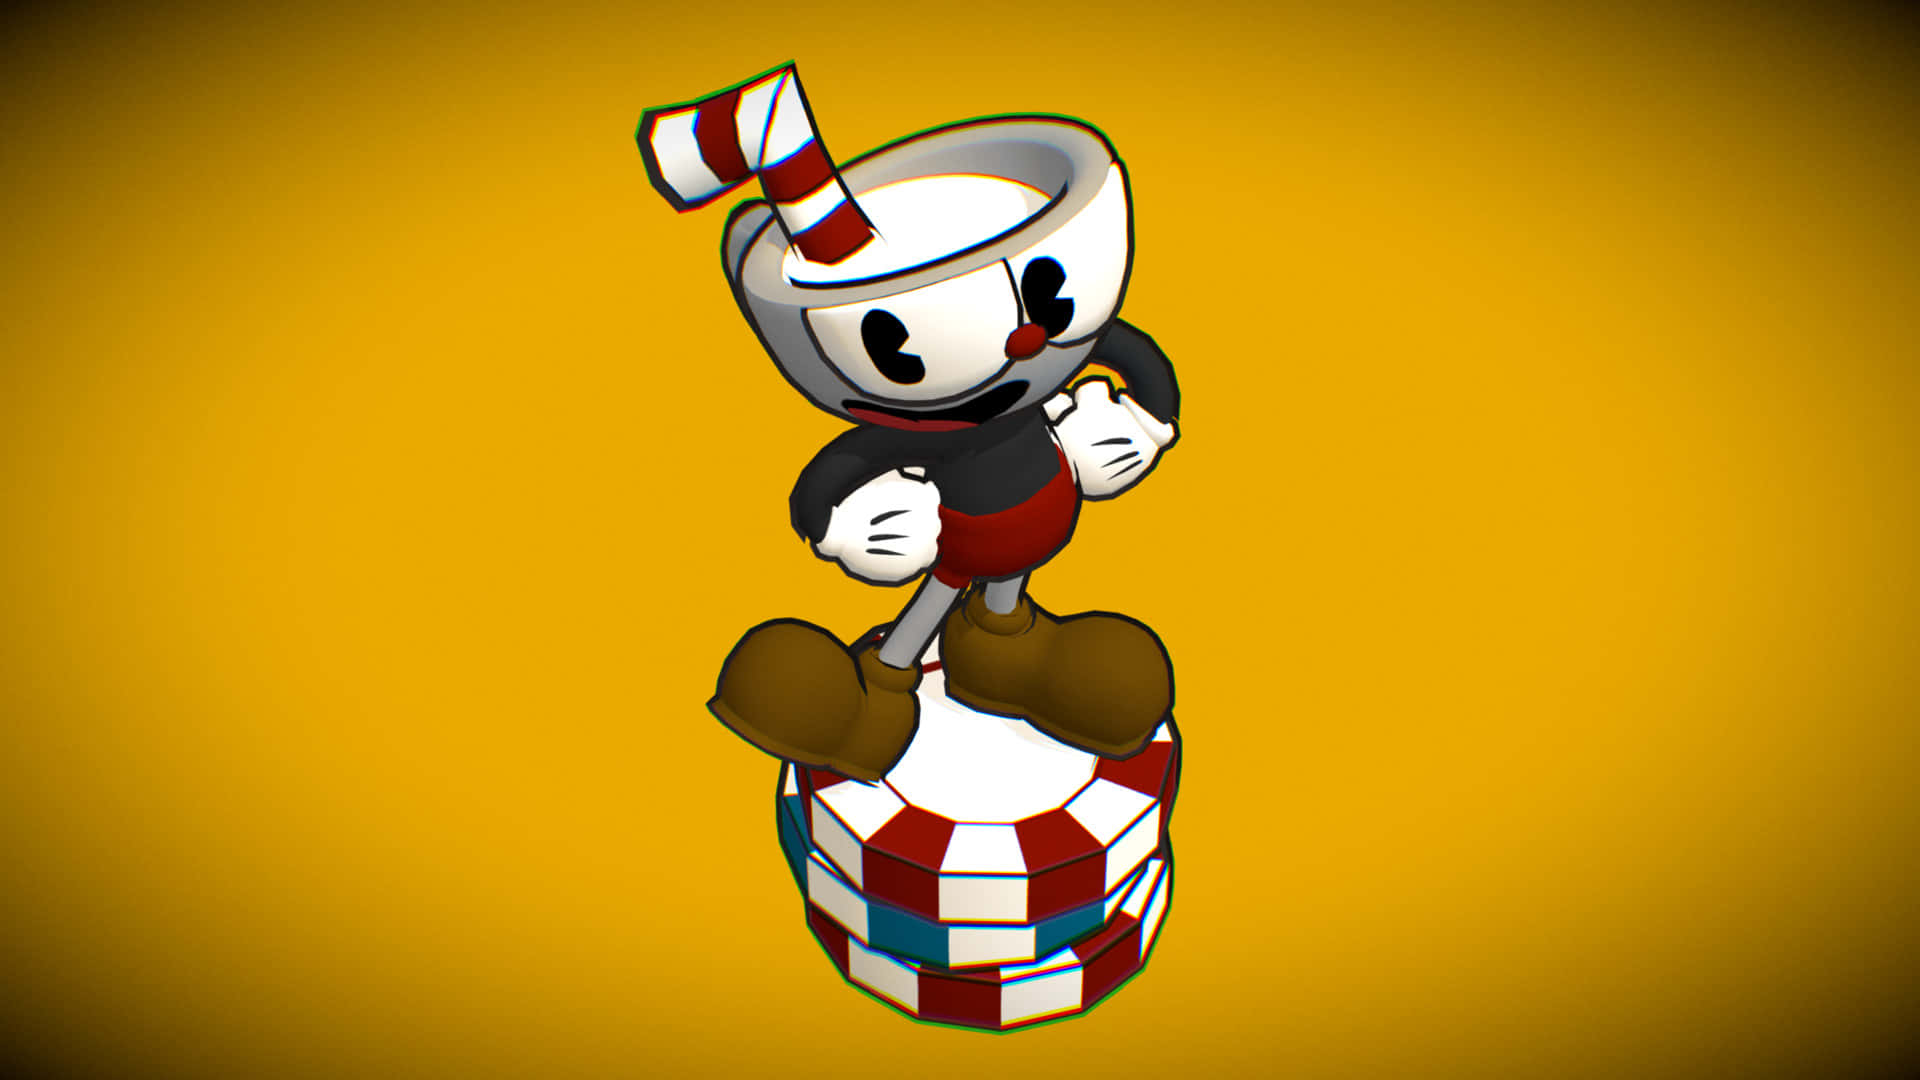 Super human duo, Cuphead and Mugman, go on an epic adventure.